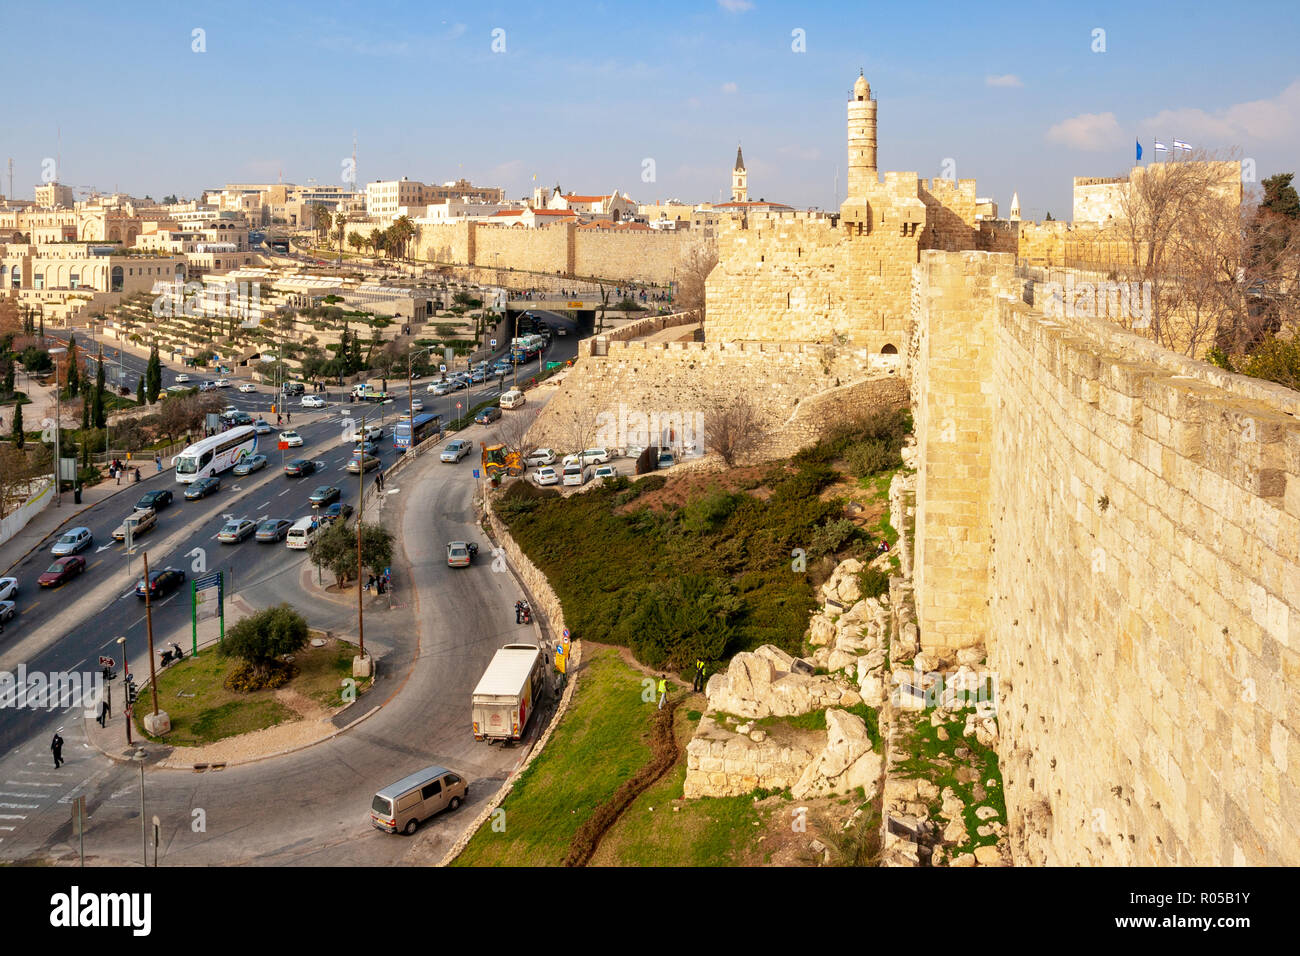 JERUSALEM - JAN 24, 2011: View from the old city wall of Jerusalem on the Tower of David and traffic around the city centre. Stock Photo